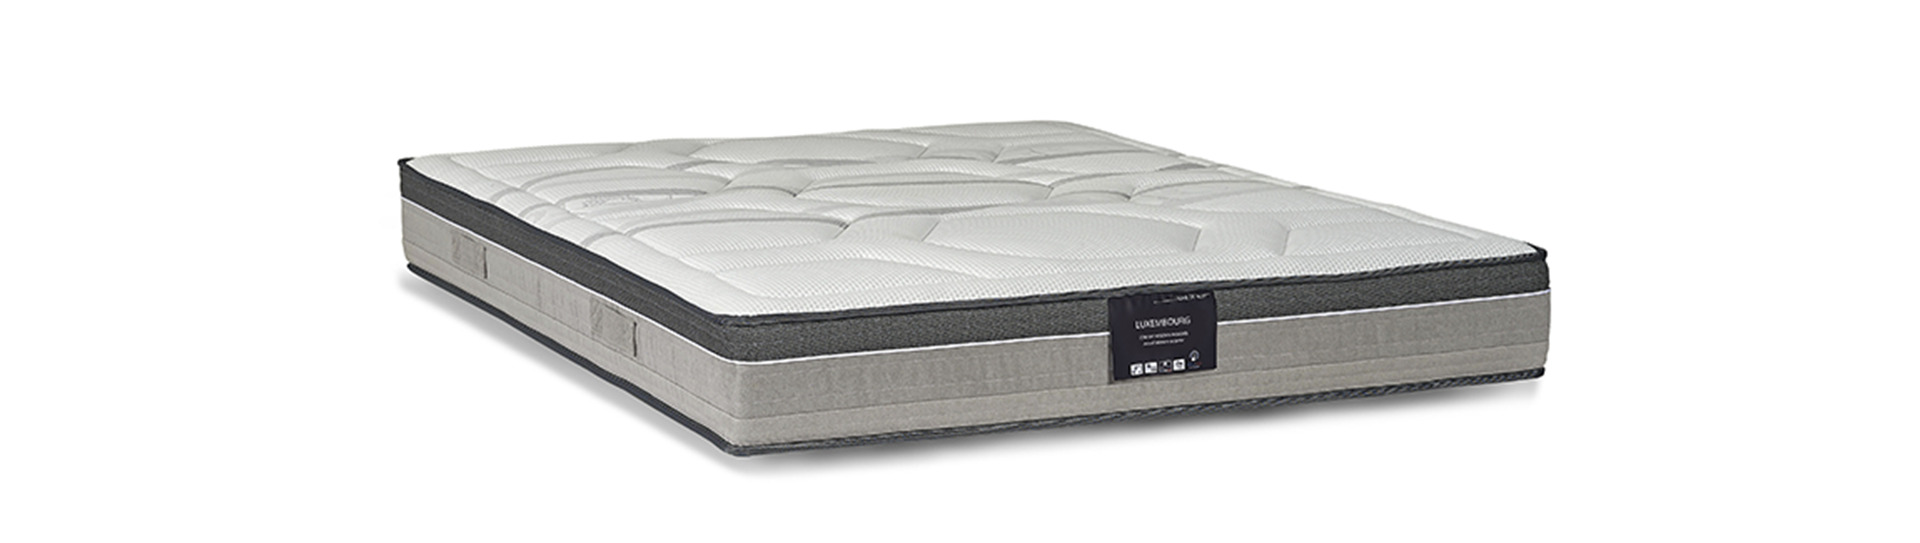 Matelas LUXEMBOURG Geant du Meuble-Matelas-LUXEMBOURG-BAN